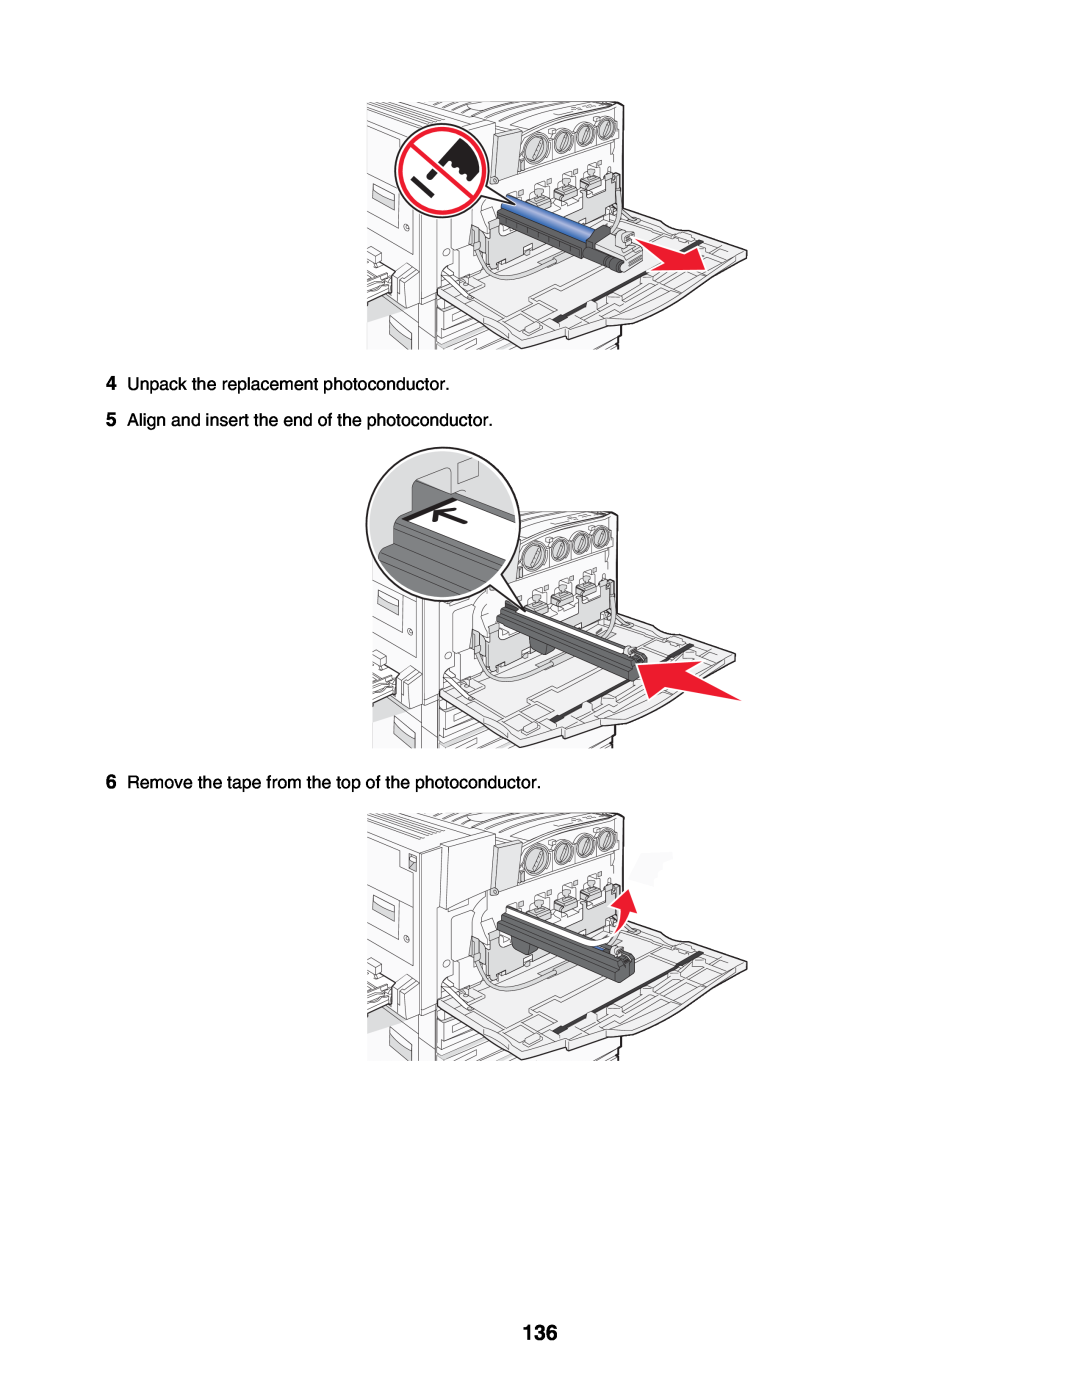 Lexmark C935 manual Unpack the replacement photoconductor, Align and insert the end of the photoconductor 